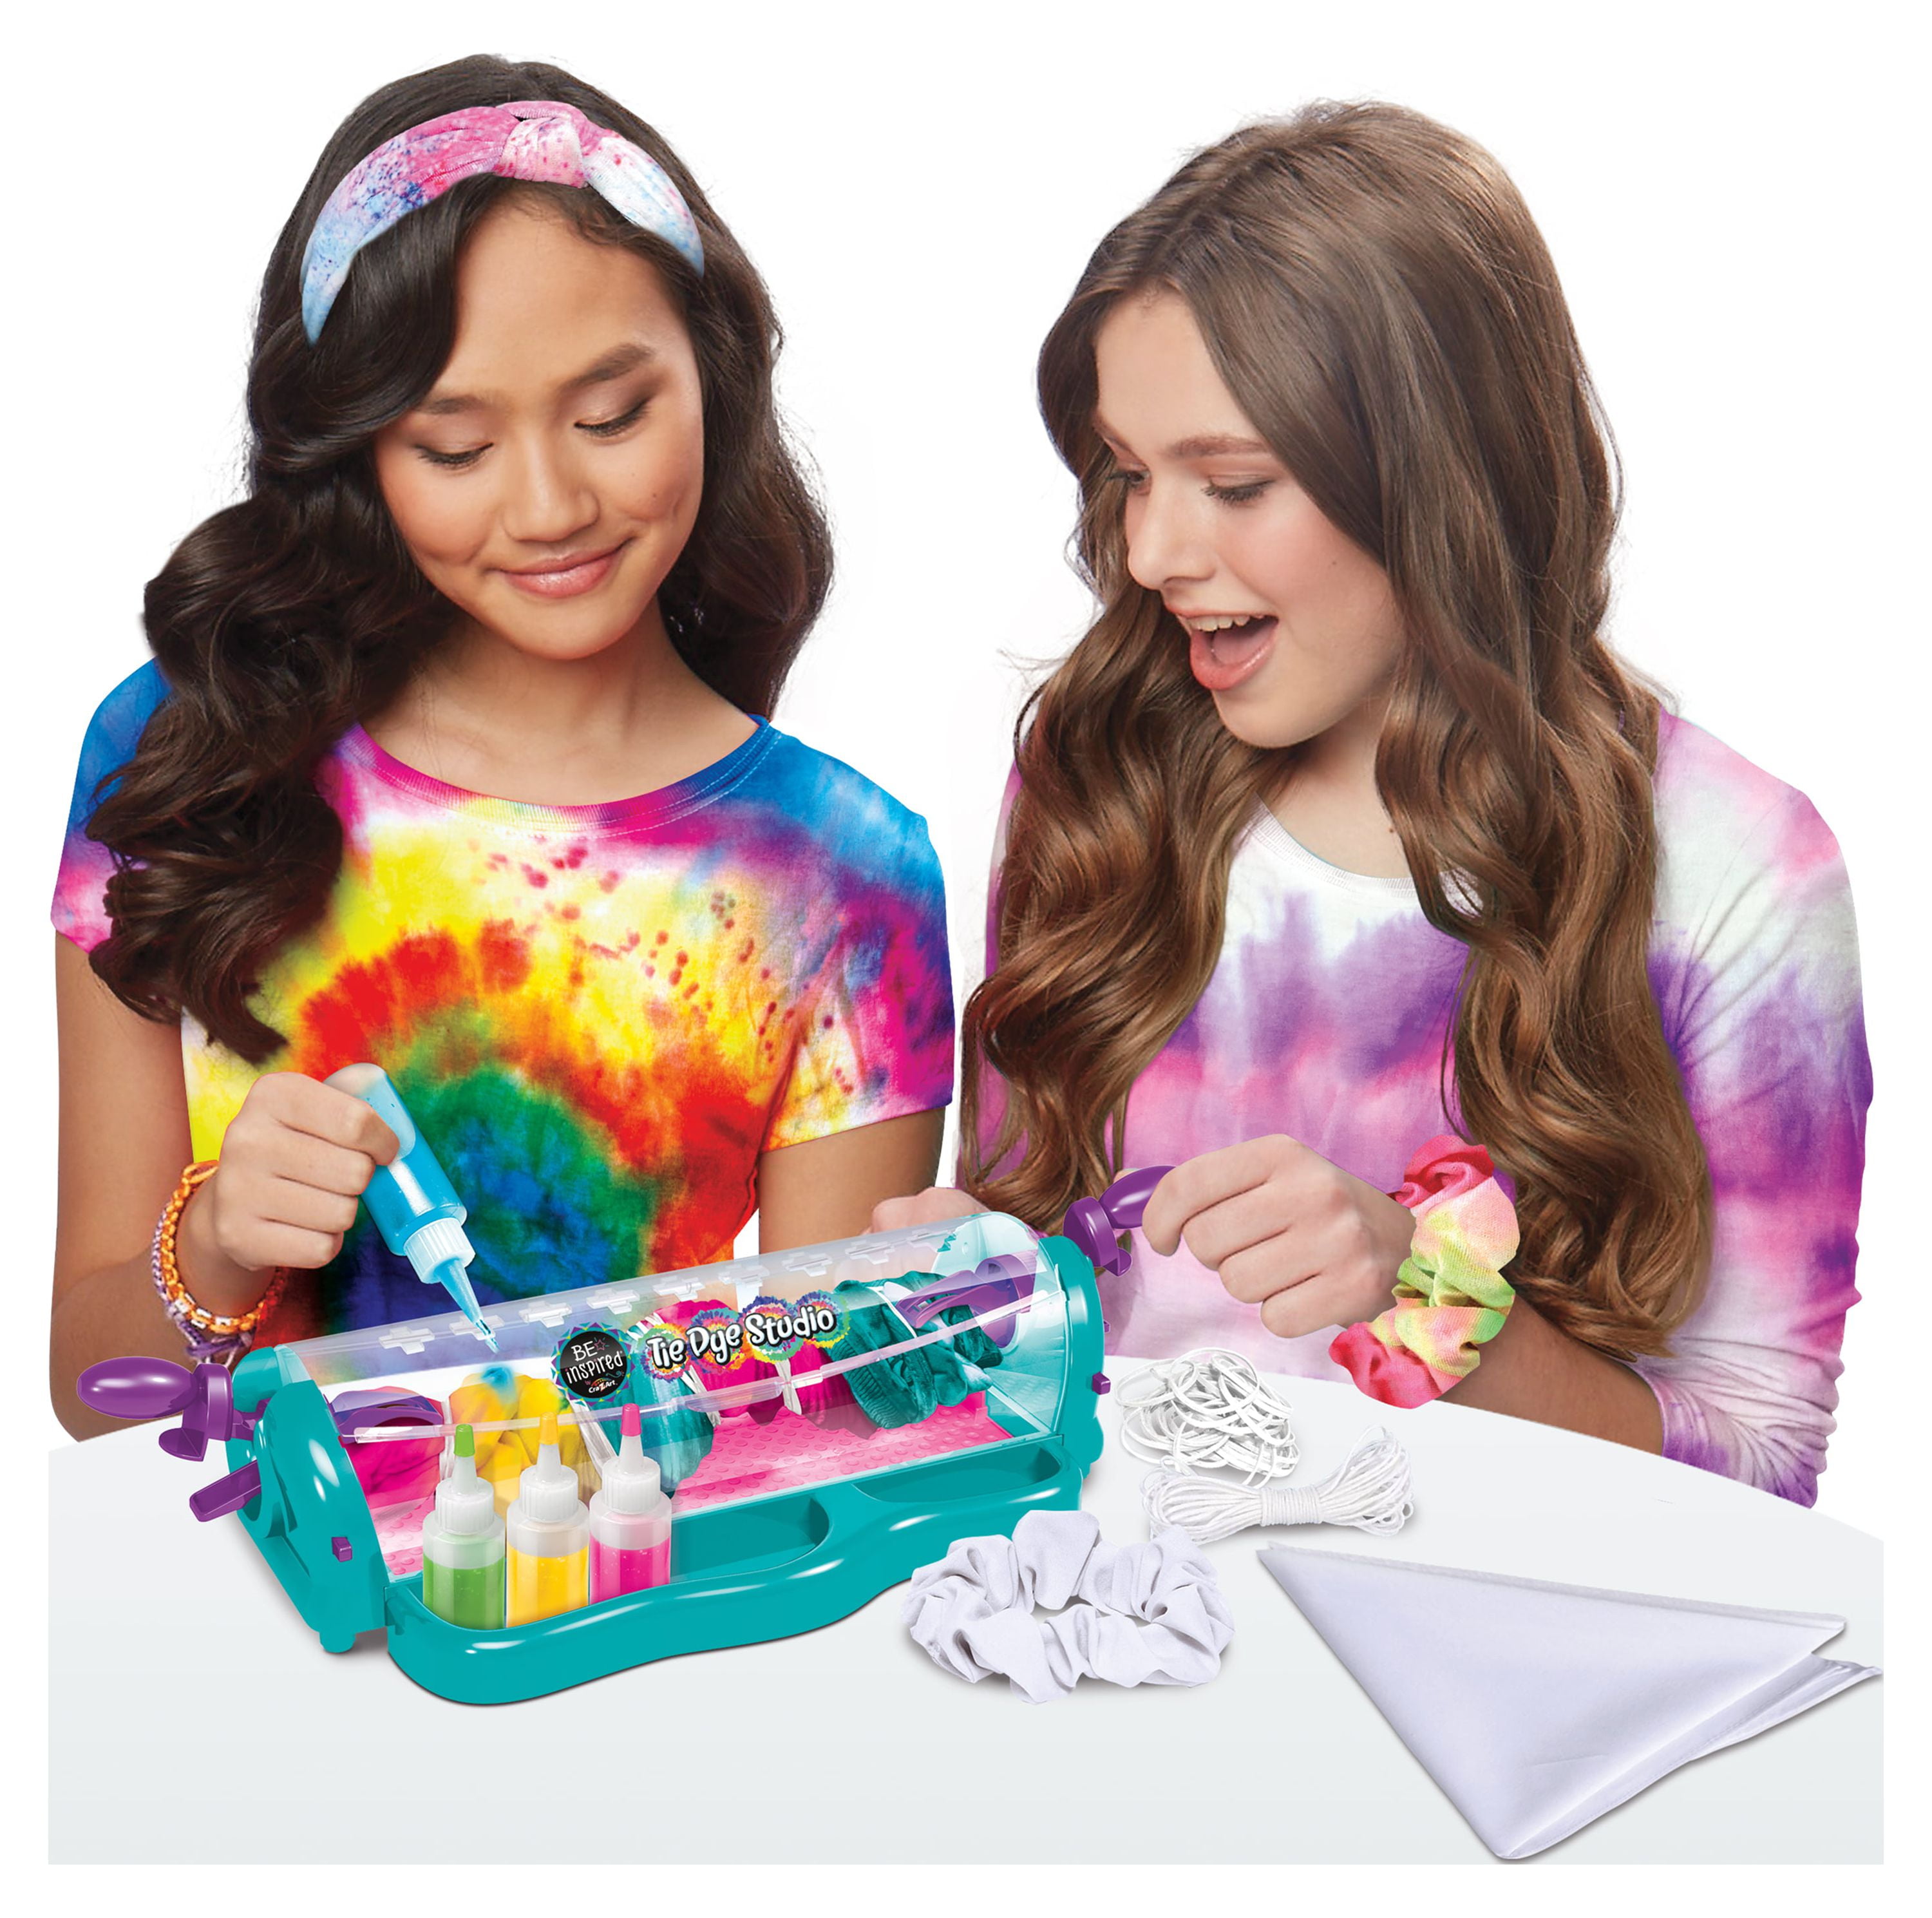 Original Stationery Color Crazy Tie Dye Kit, Fun Tie Dye Kit for Girls Ages  10-12 with Tie Dye Colors to Make Colorful Tie Dye Crafts, Great Gift Idea